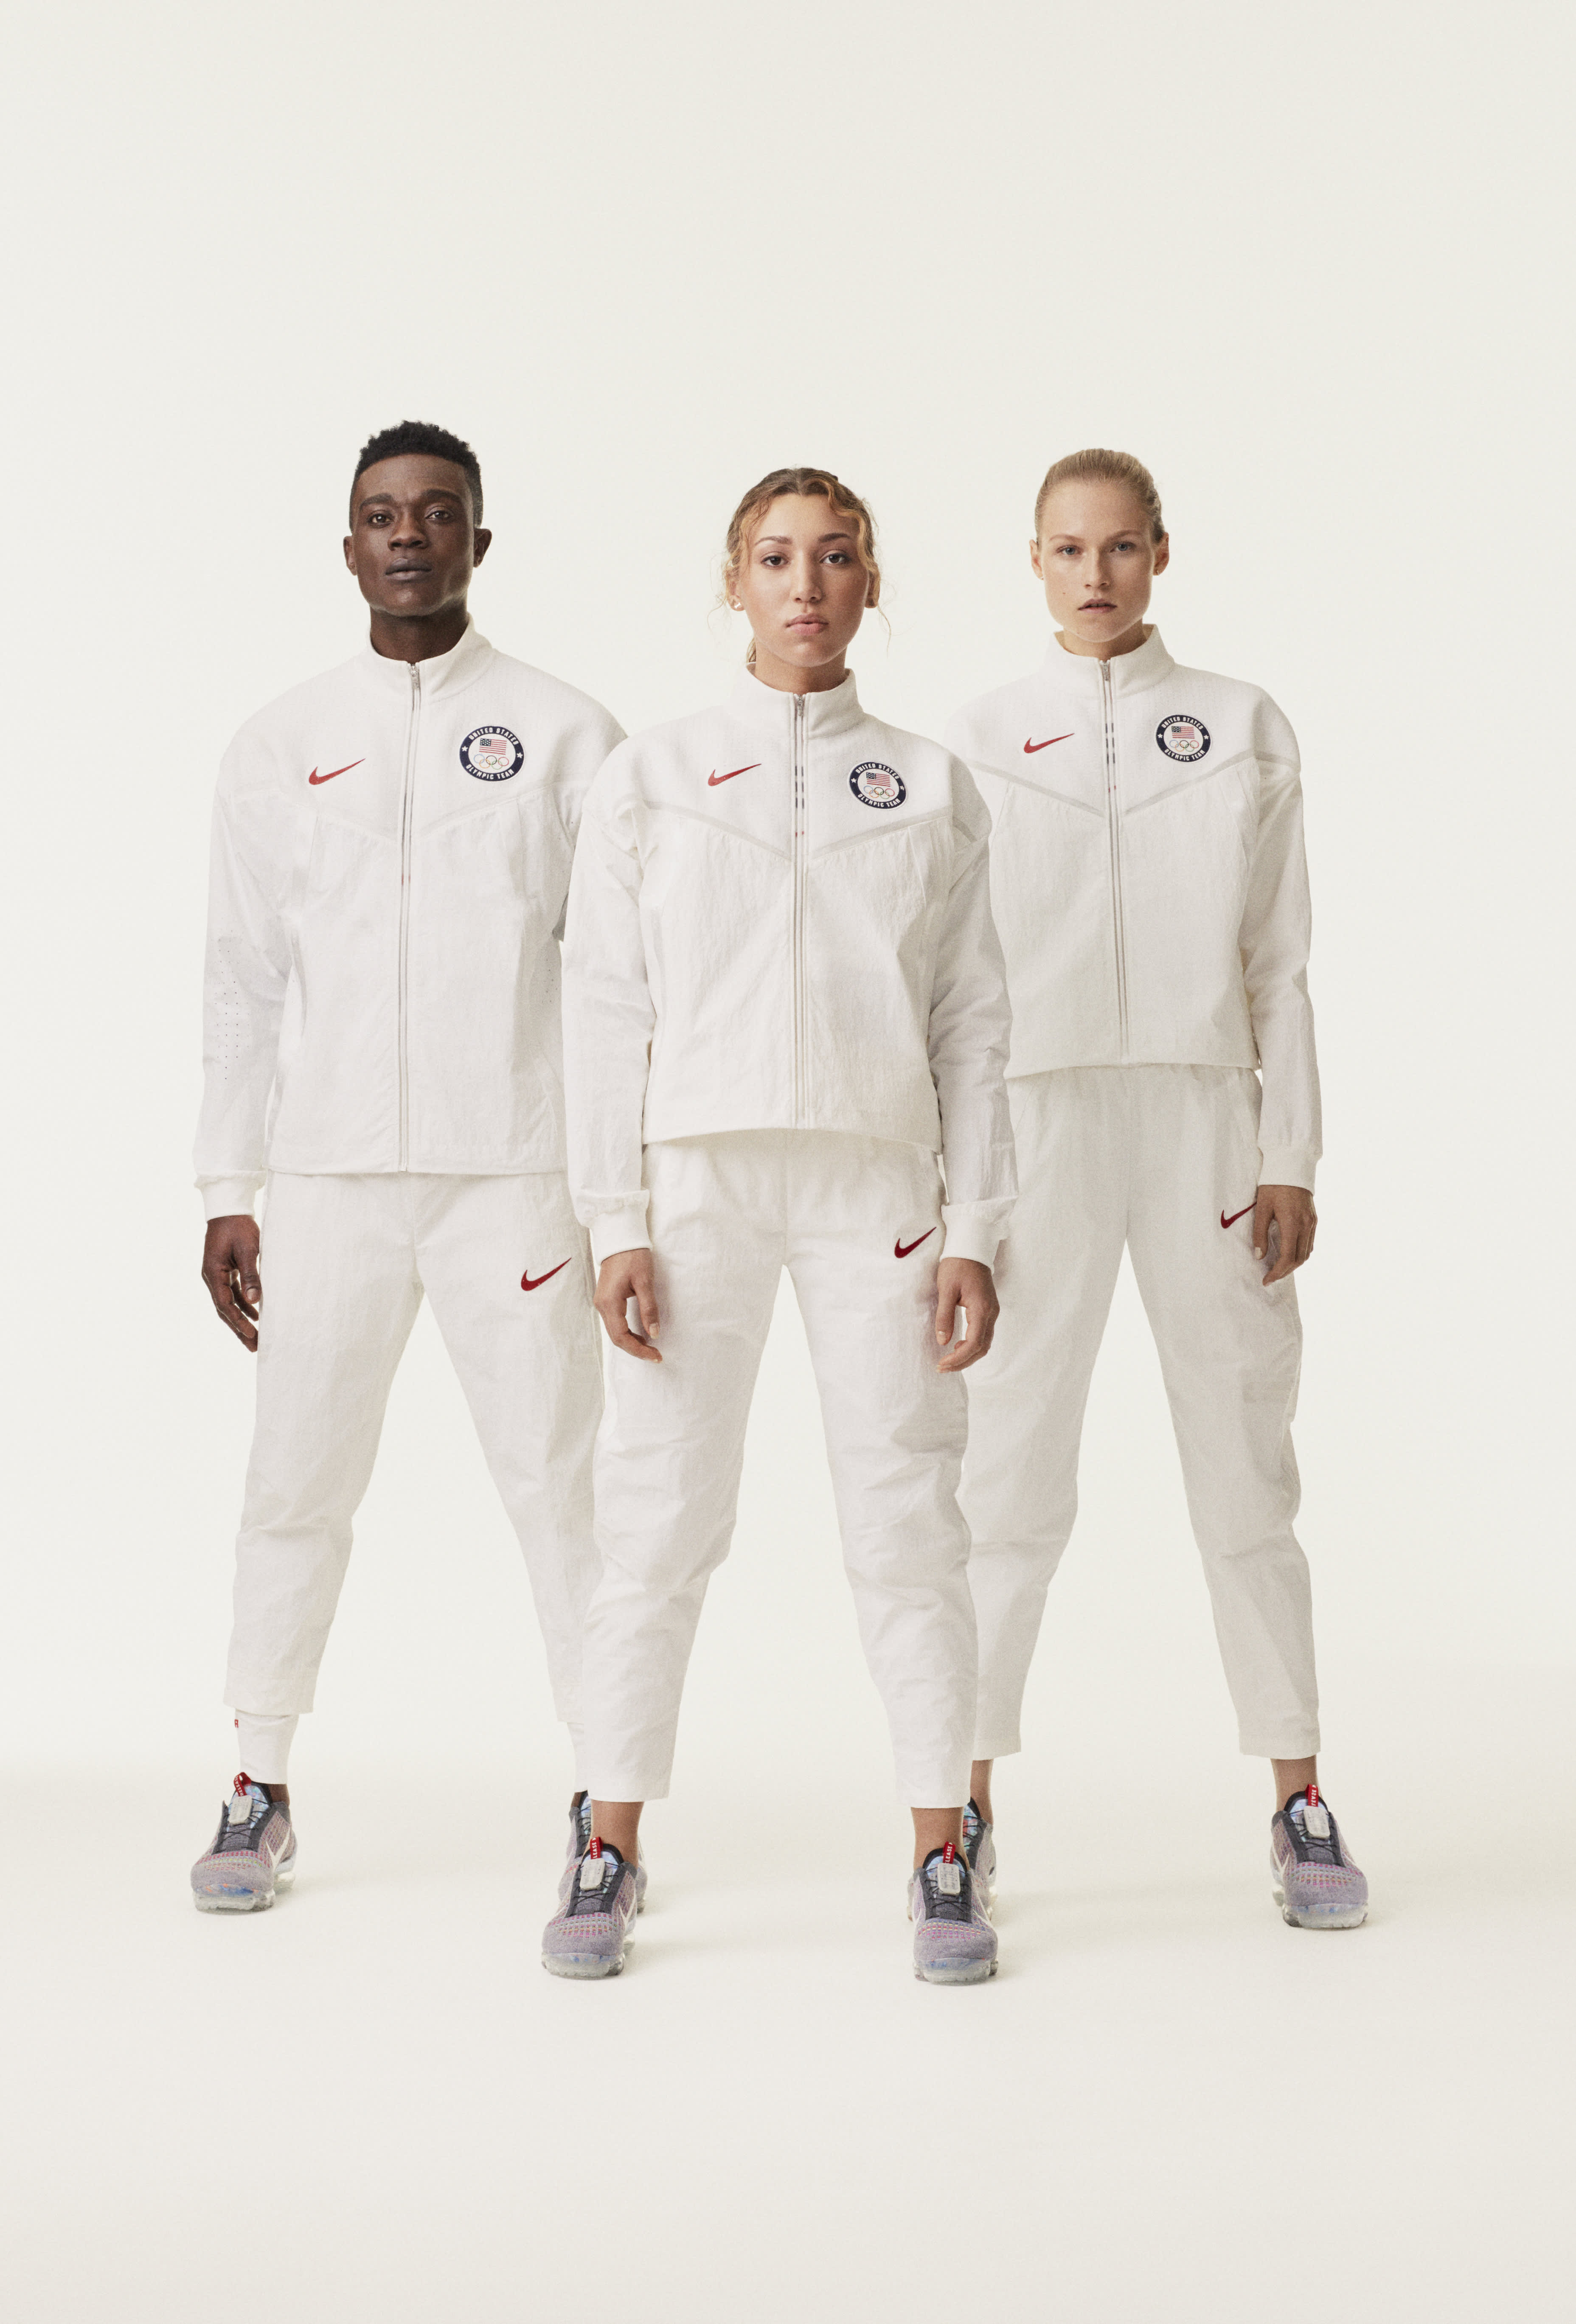 to dress 2020 Olympic athletes uniforms made of recycled